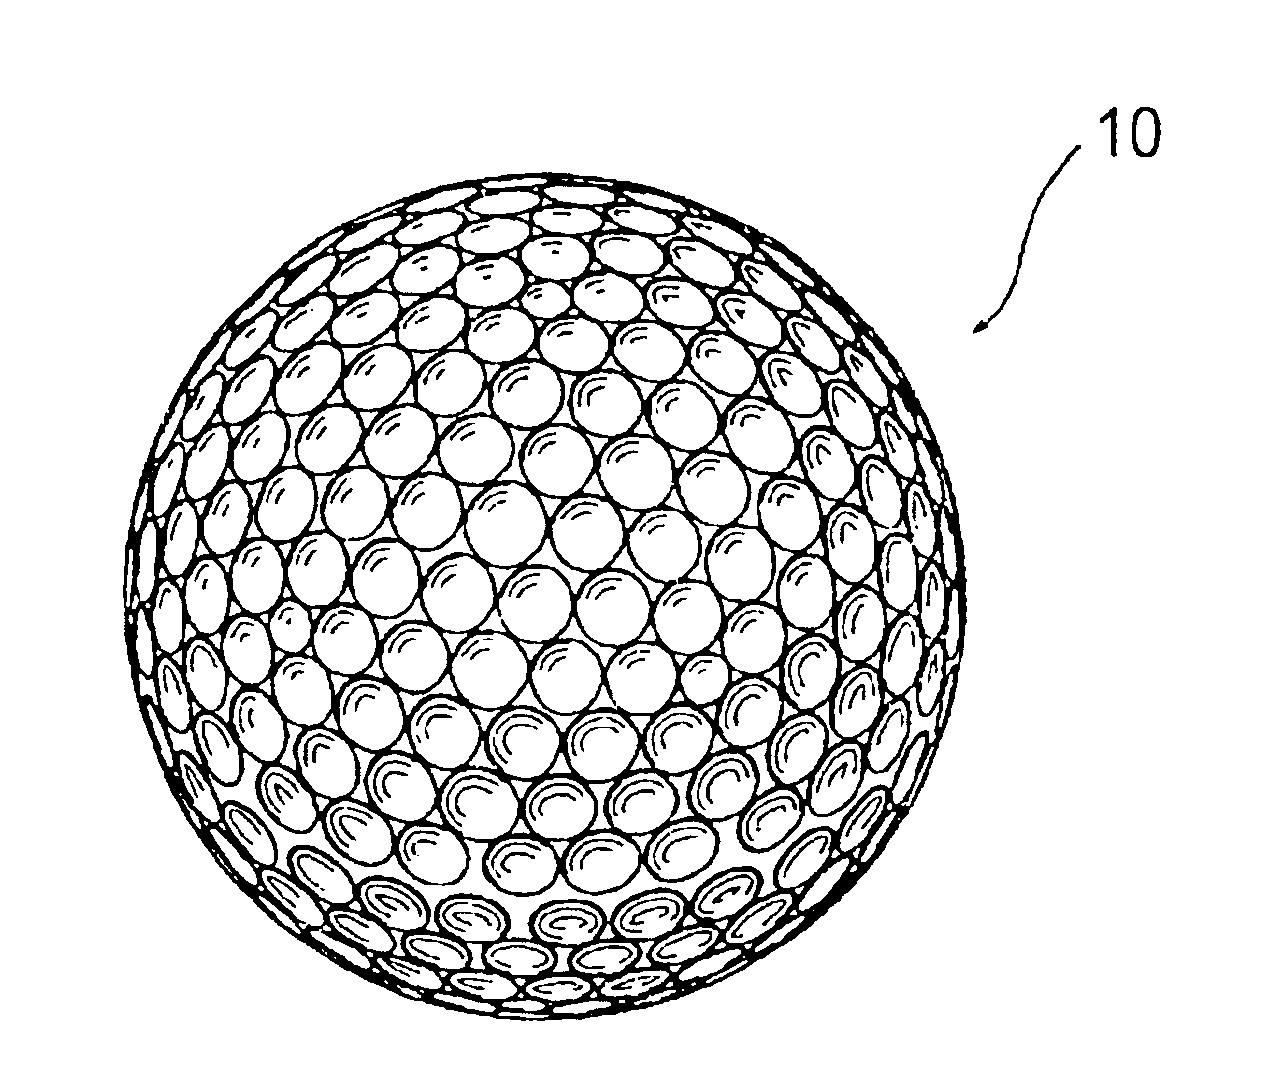 Golf ball with vapor barrier layer and method of making same